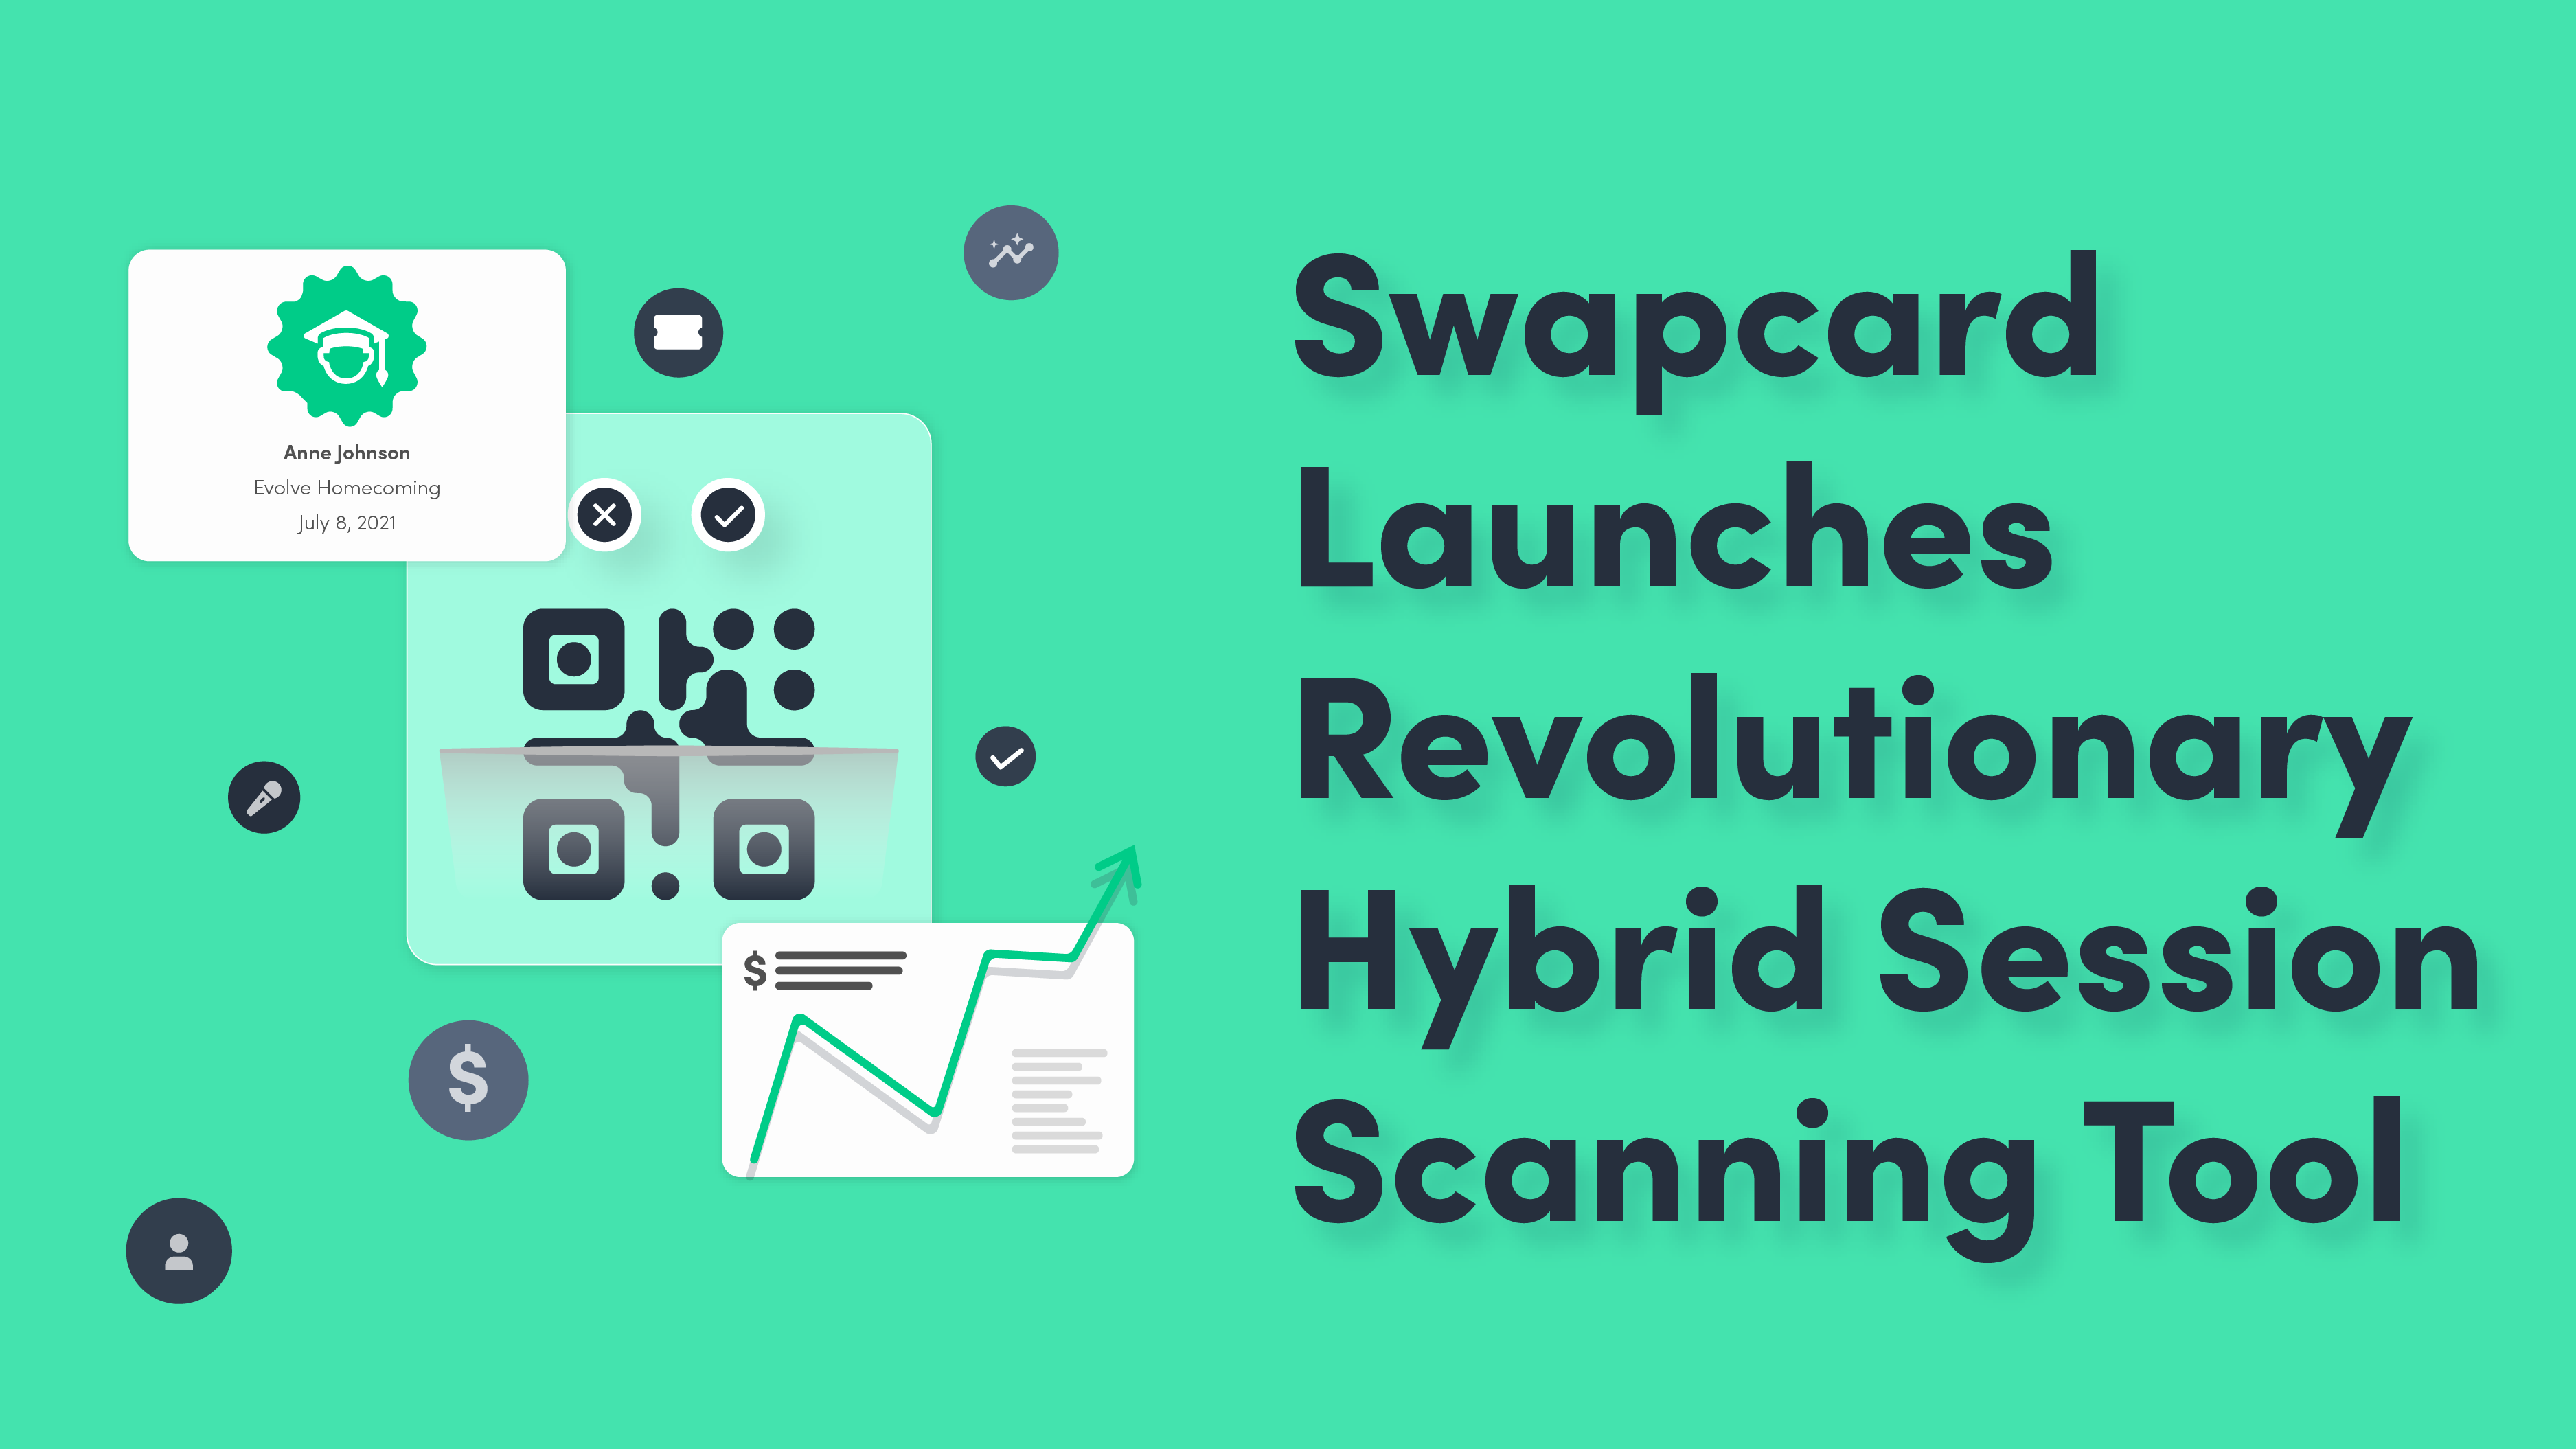 Swapcard Launches Revolutionary Hybrid Session Scanning Tool